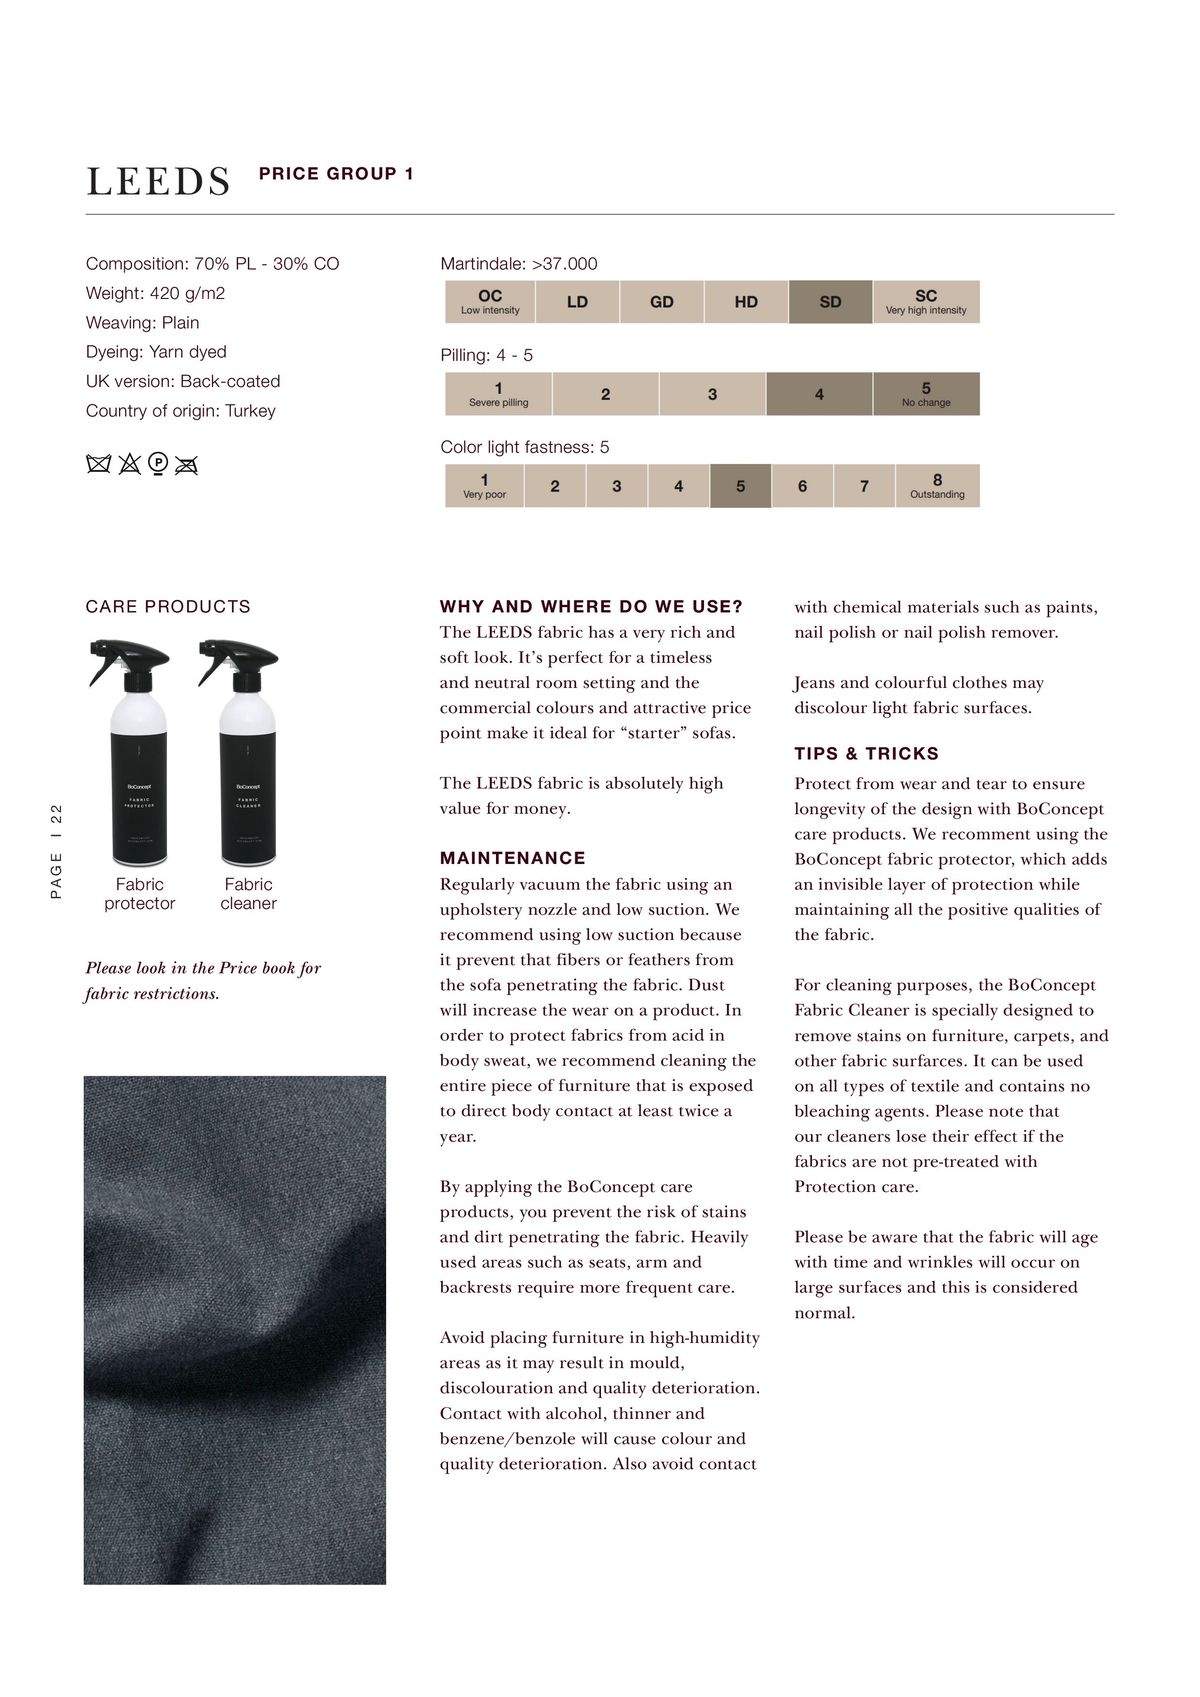 Catalogue Explore our contract materials guide, page 00022